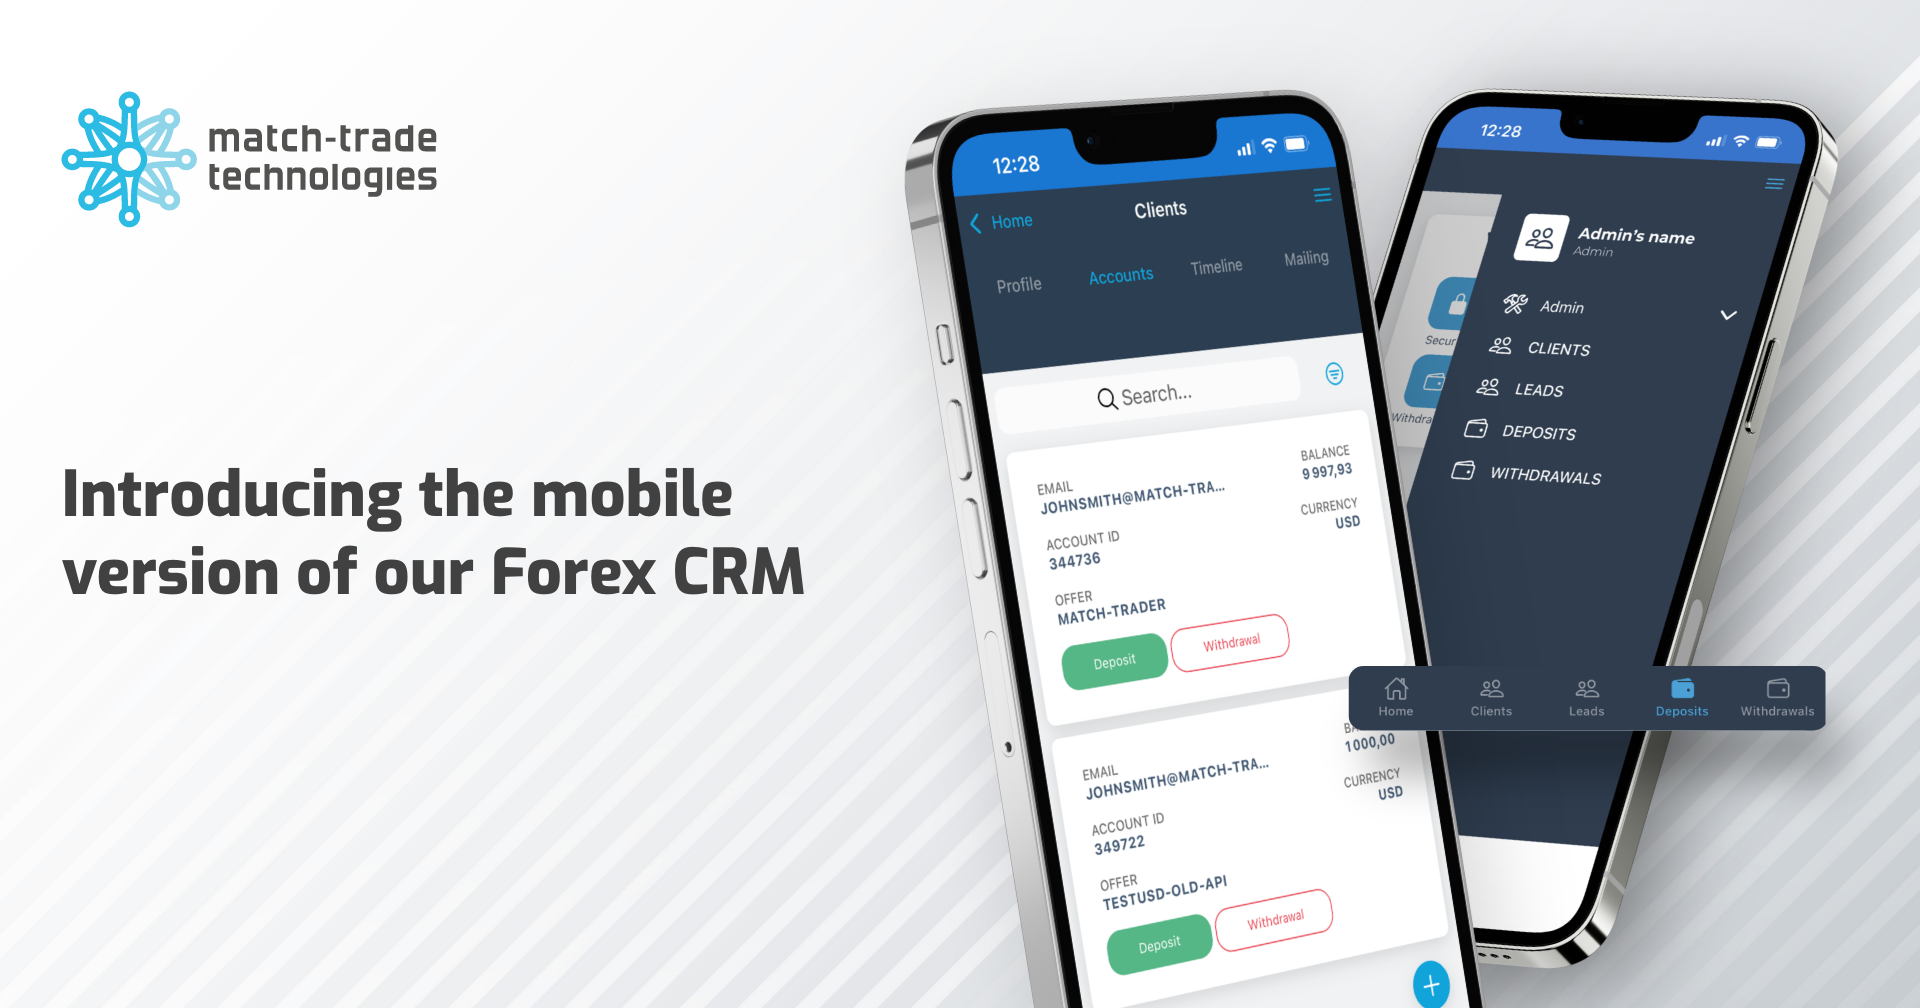 Match-Trade November release: Introducing the mobile version of our Forex CRM